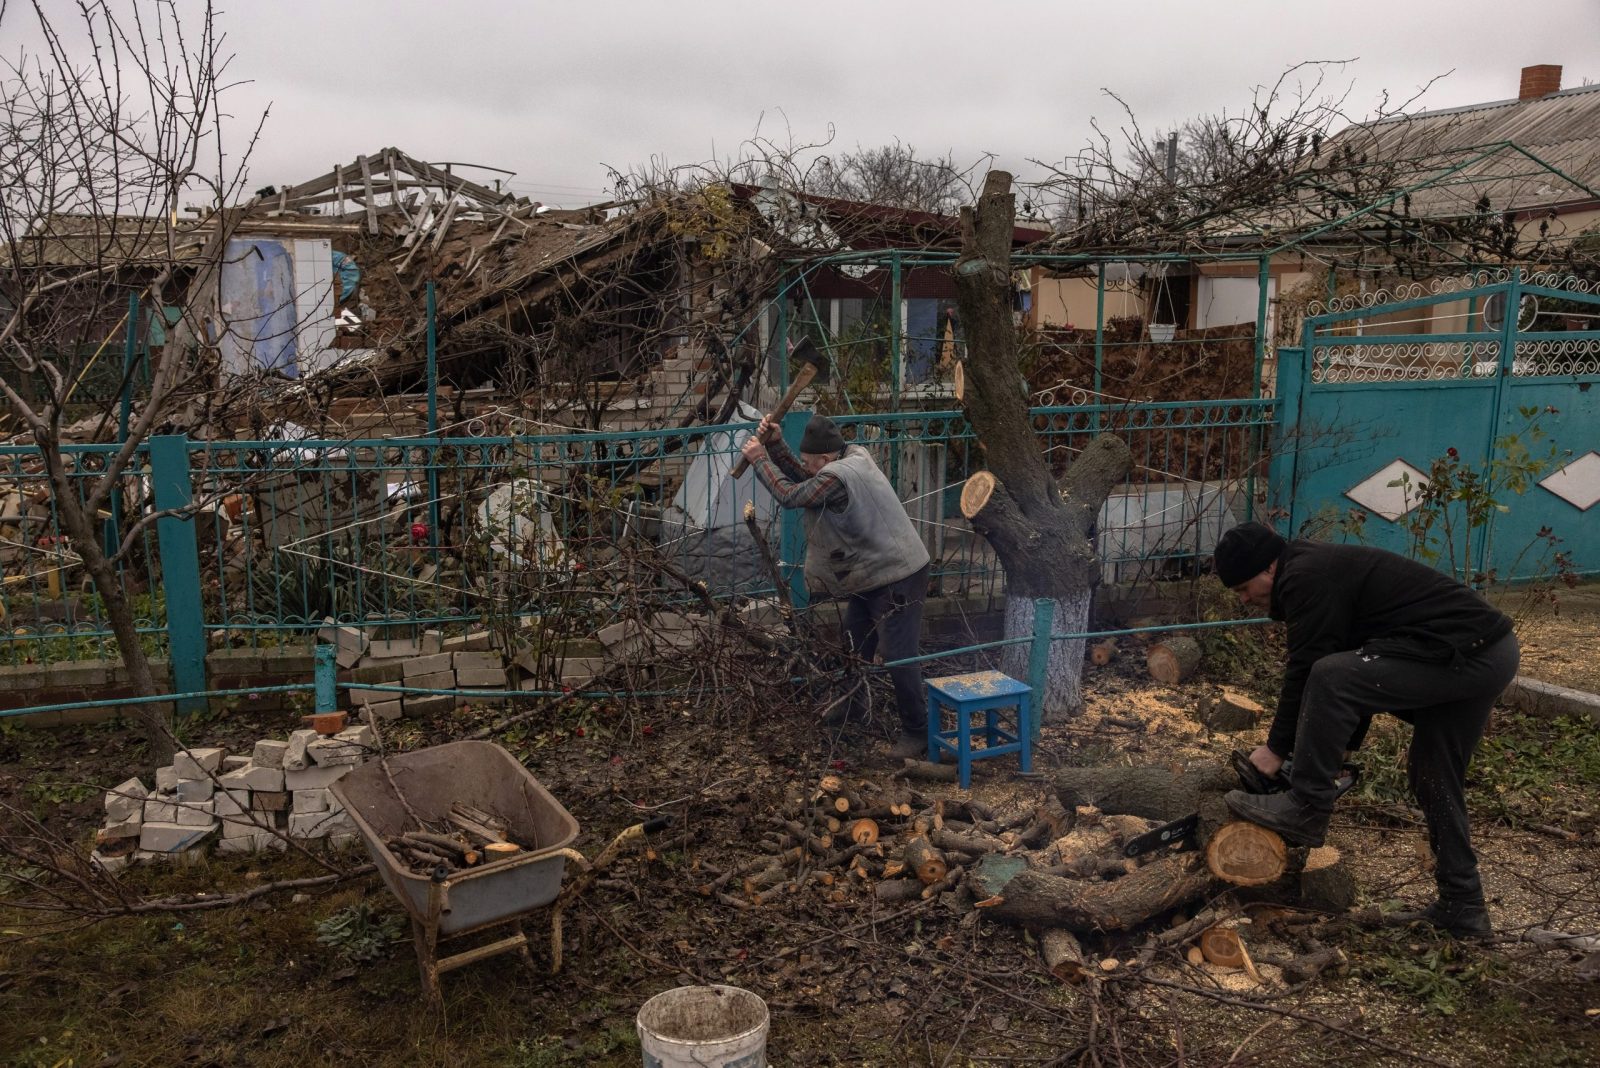 epa10339898 Victor Tsap(C) prepares wood for the winter season next to his destroyed house in the village of Pravdyne, outside Kherson, southern Ukraine, 30 November 2022. On its retreat from Kherson, the Russian army destroyed critical infrastructure in the city, including electricity and water supplies. Now, the constant Russian shellings, the lack of electricity, and running water in the town during the winter season has forced many locals to flee Kherson. Ukrainian troops entered Kherson on 11 November after the Russian army had withdrawn from the city which they captured in the early stage of the conflict, shortly after Russian troops had entered Ukraine in February 2022.  EPA/ROMAN PILIPEY